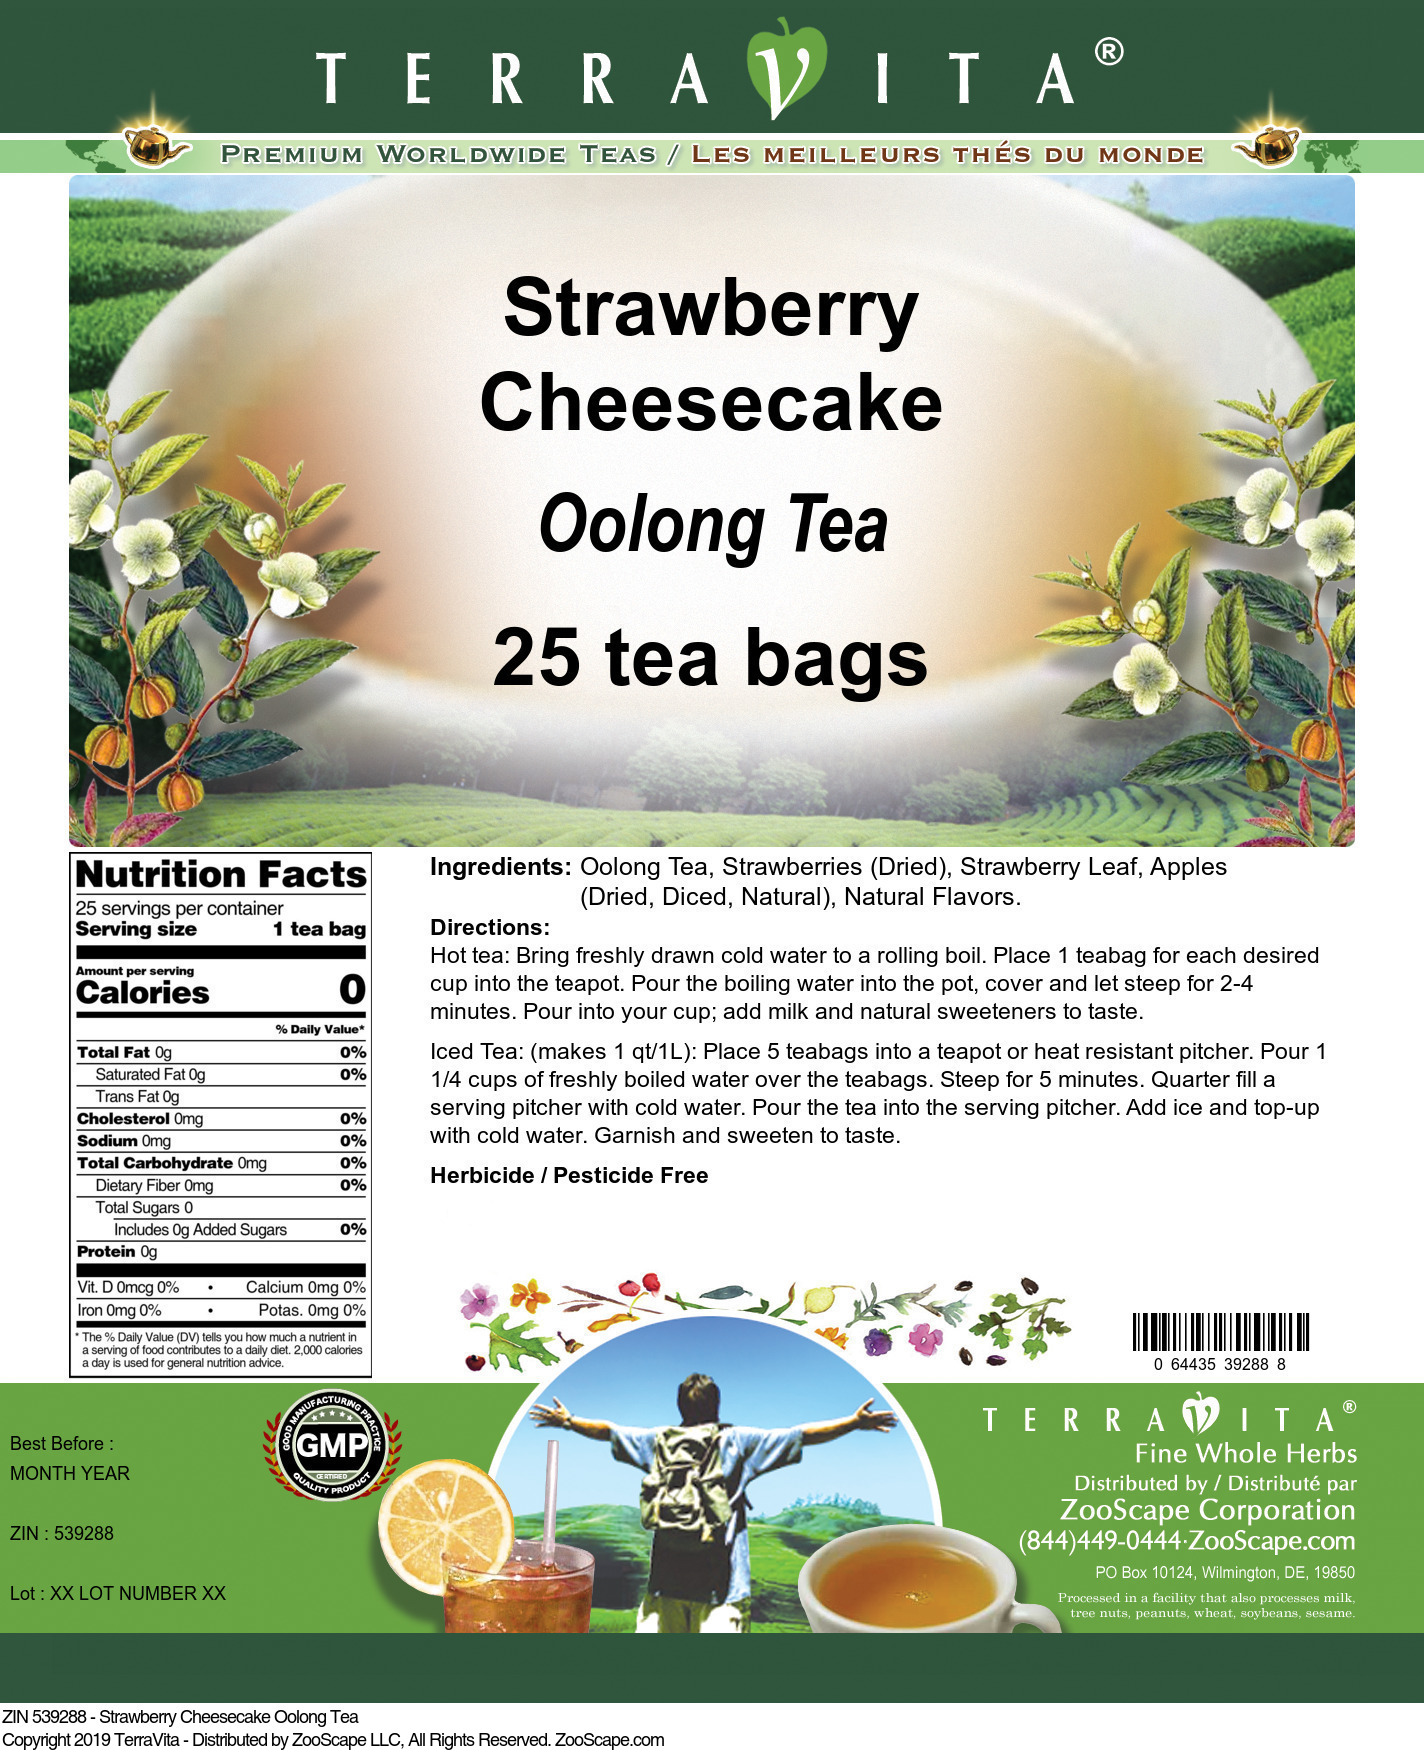 Strawberry Cheesecake Oolong Tea - Label